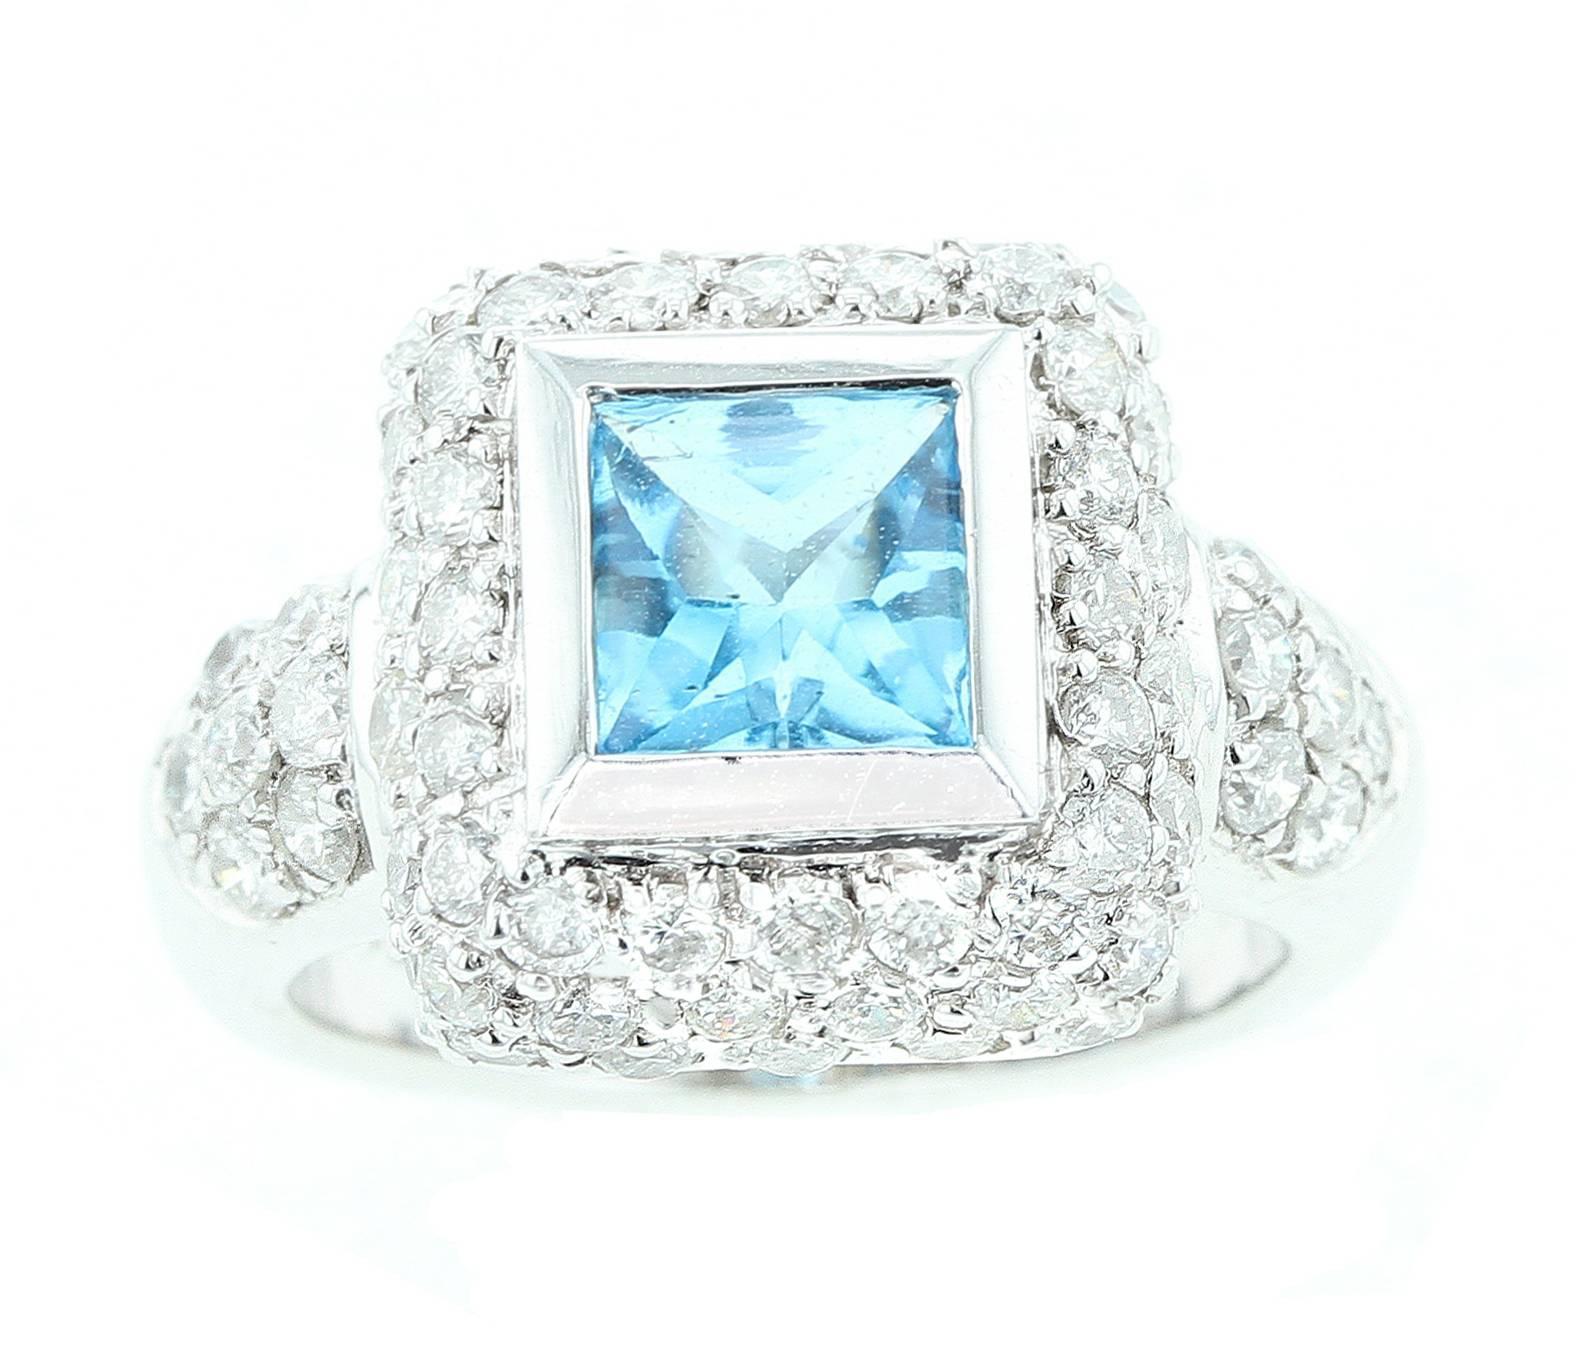 A square shape blue topaz with a white gold border accented with white round diamonds on the base and on the sides of the mounting. Set in 18K White Gold. Size 5.25.